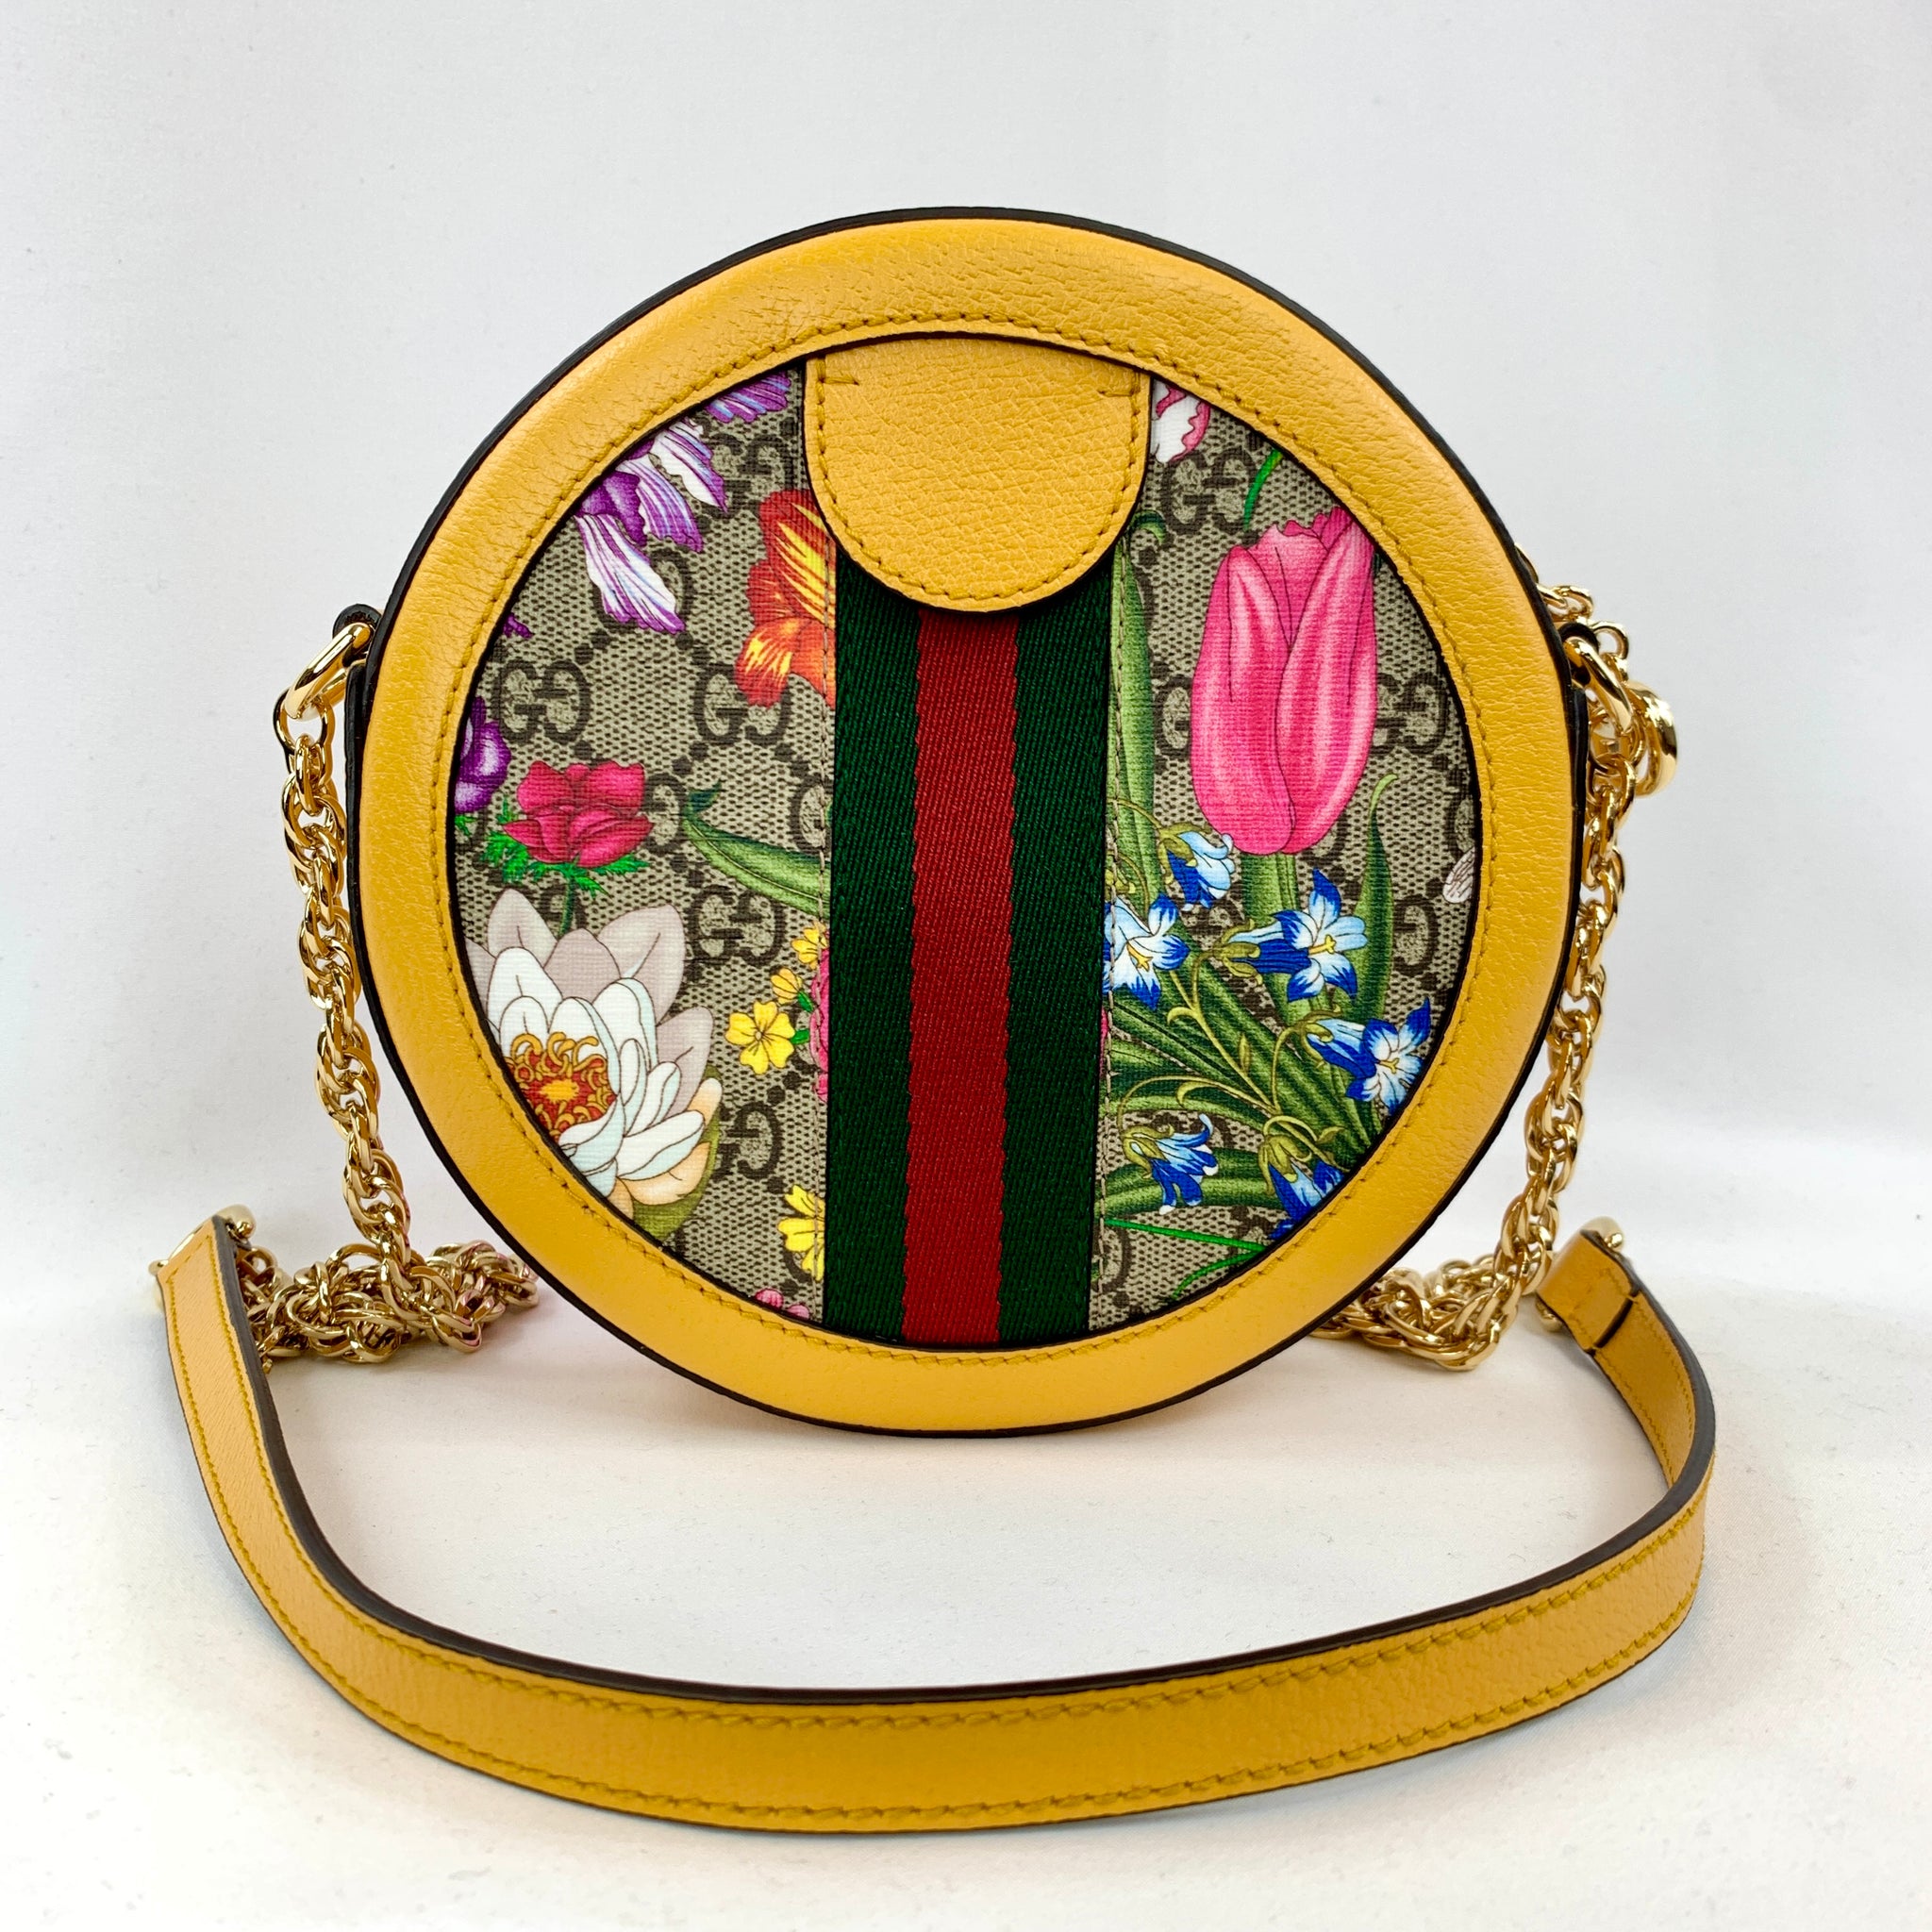 GUCCI Ophidia Web Floral Crossbody – A Daily Diva